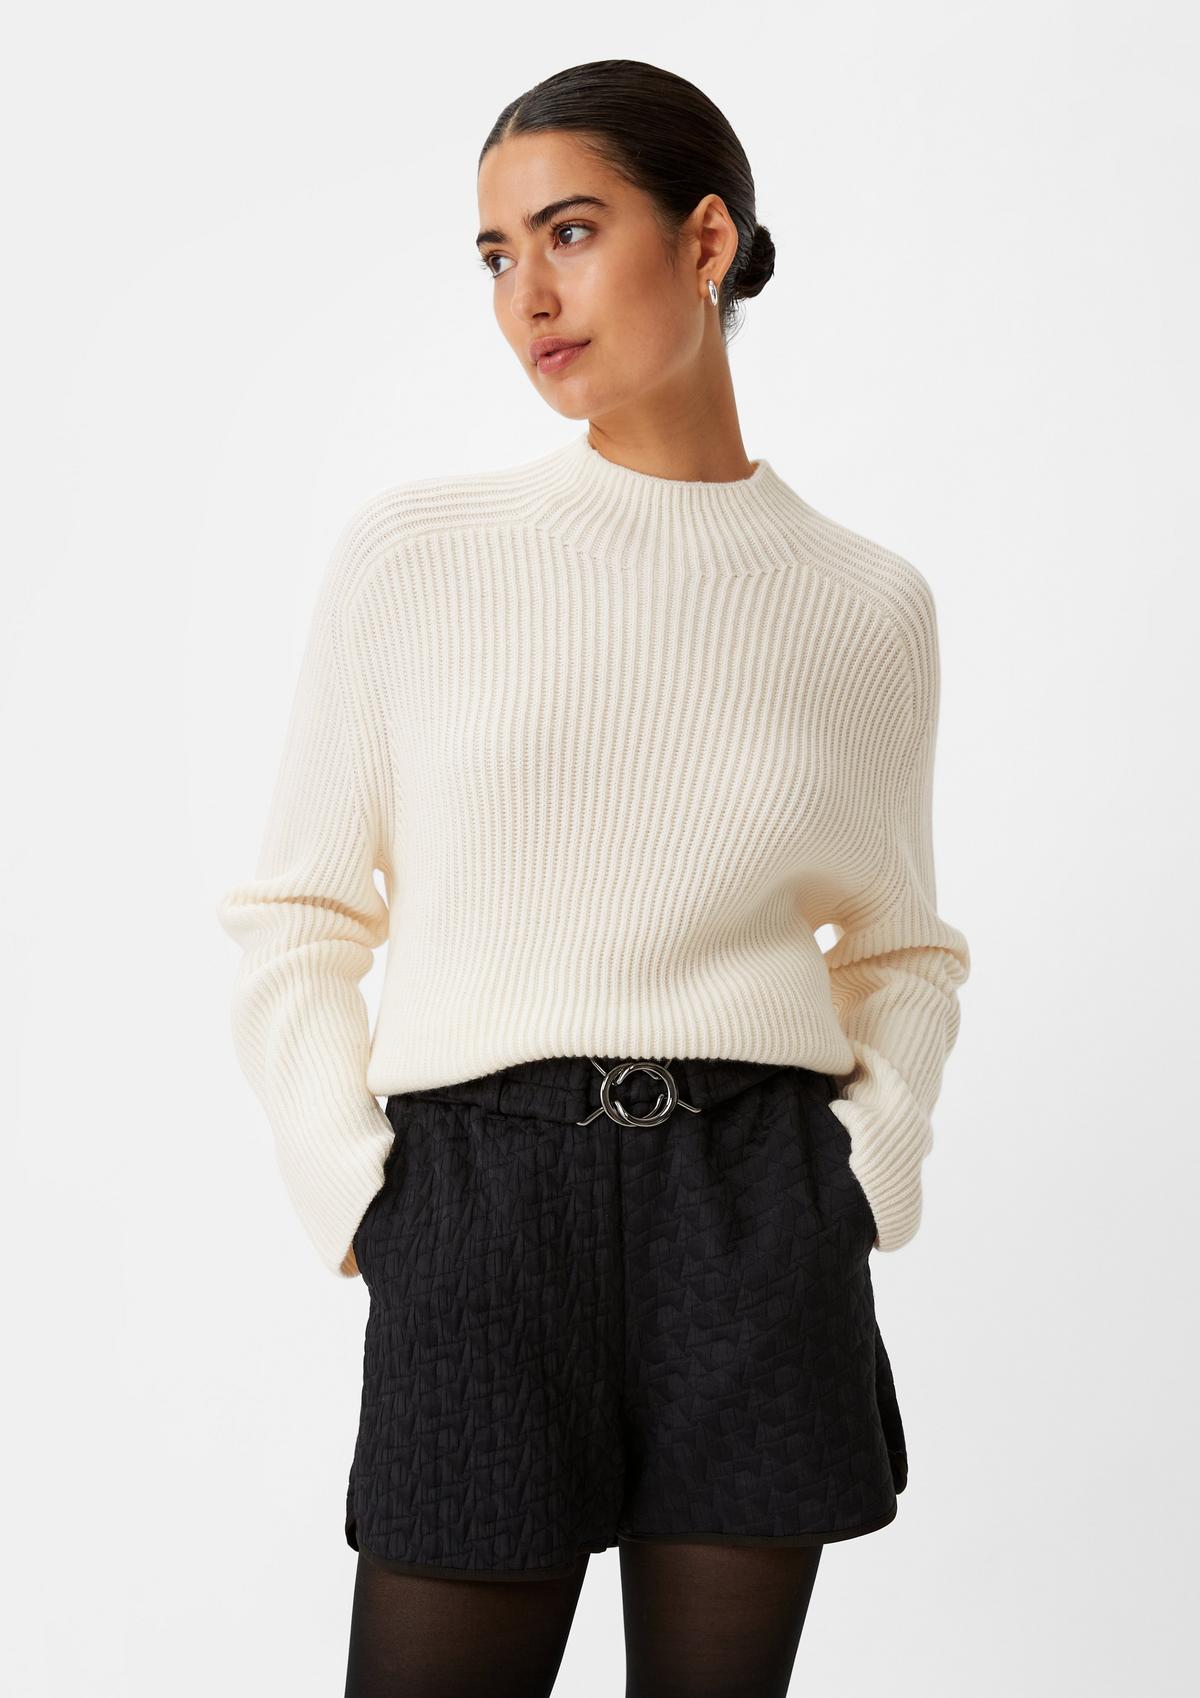 Knitted jumper with a ribbed texture